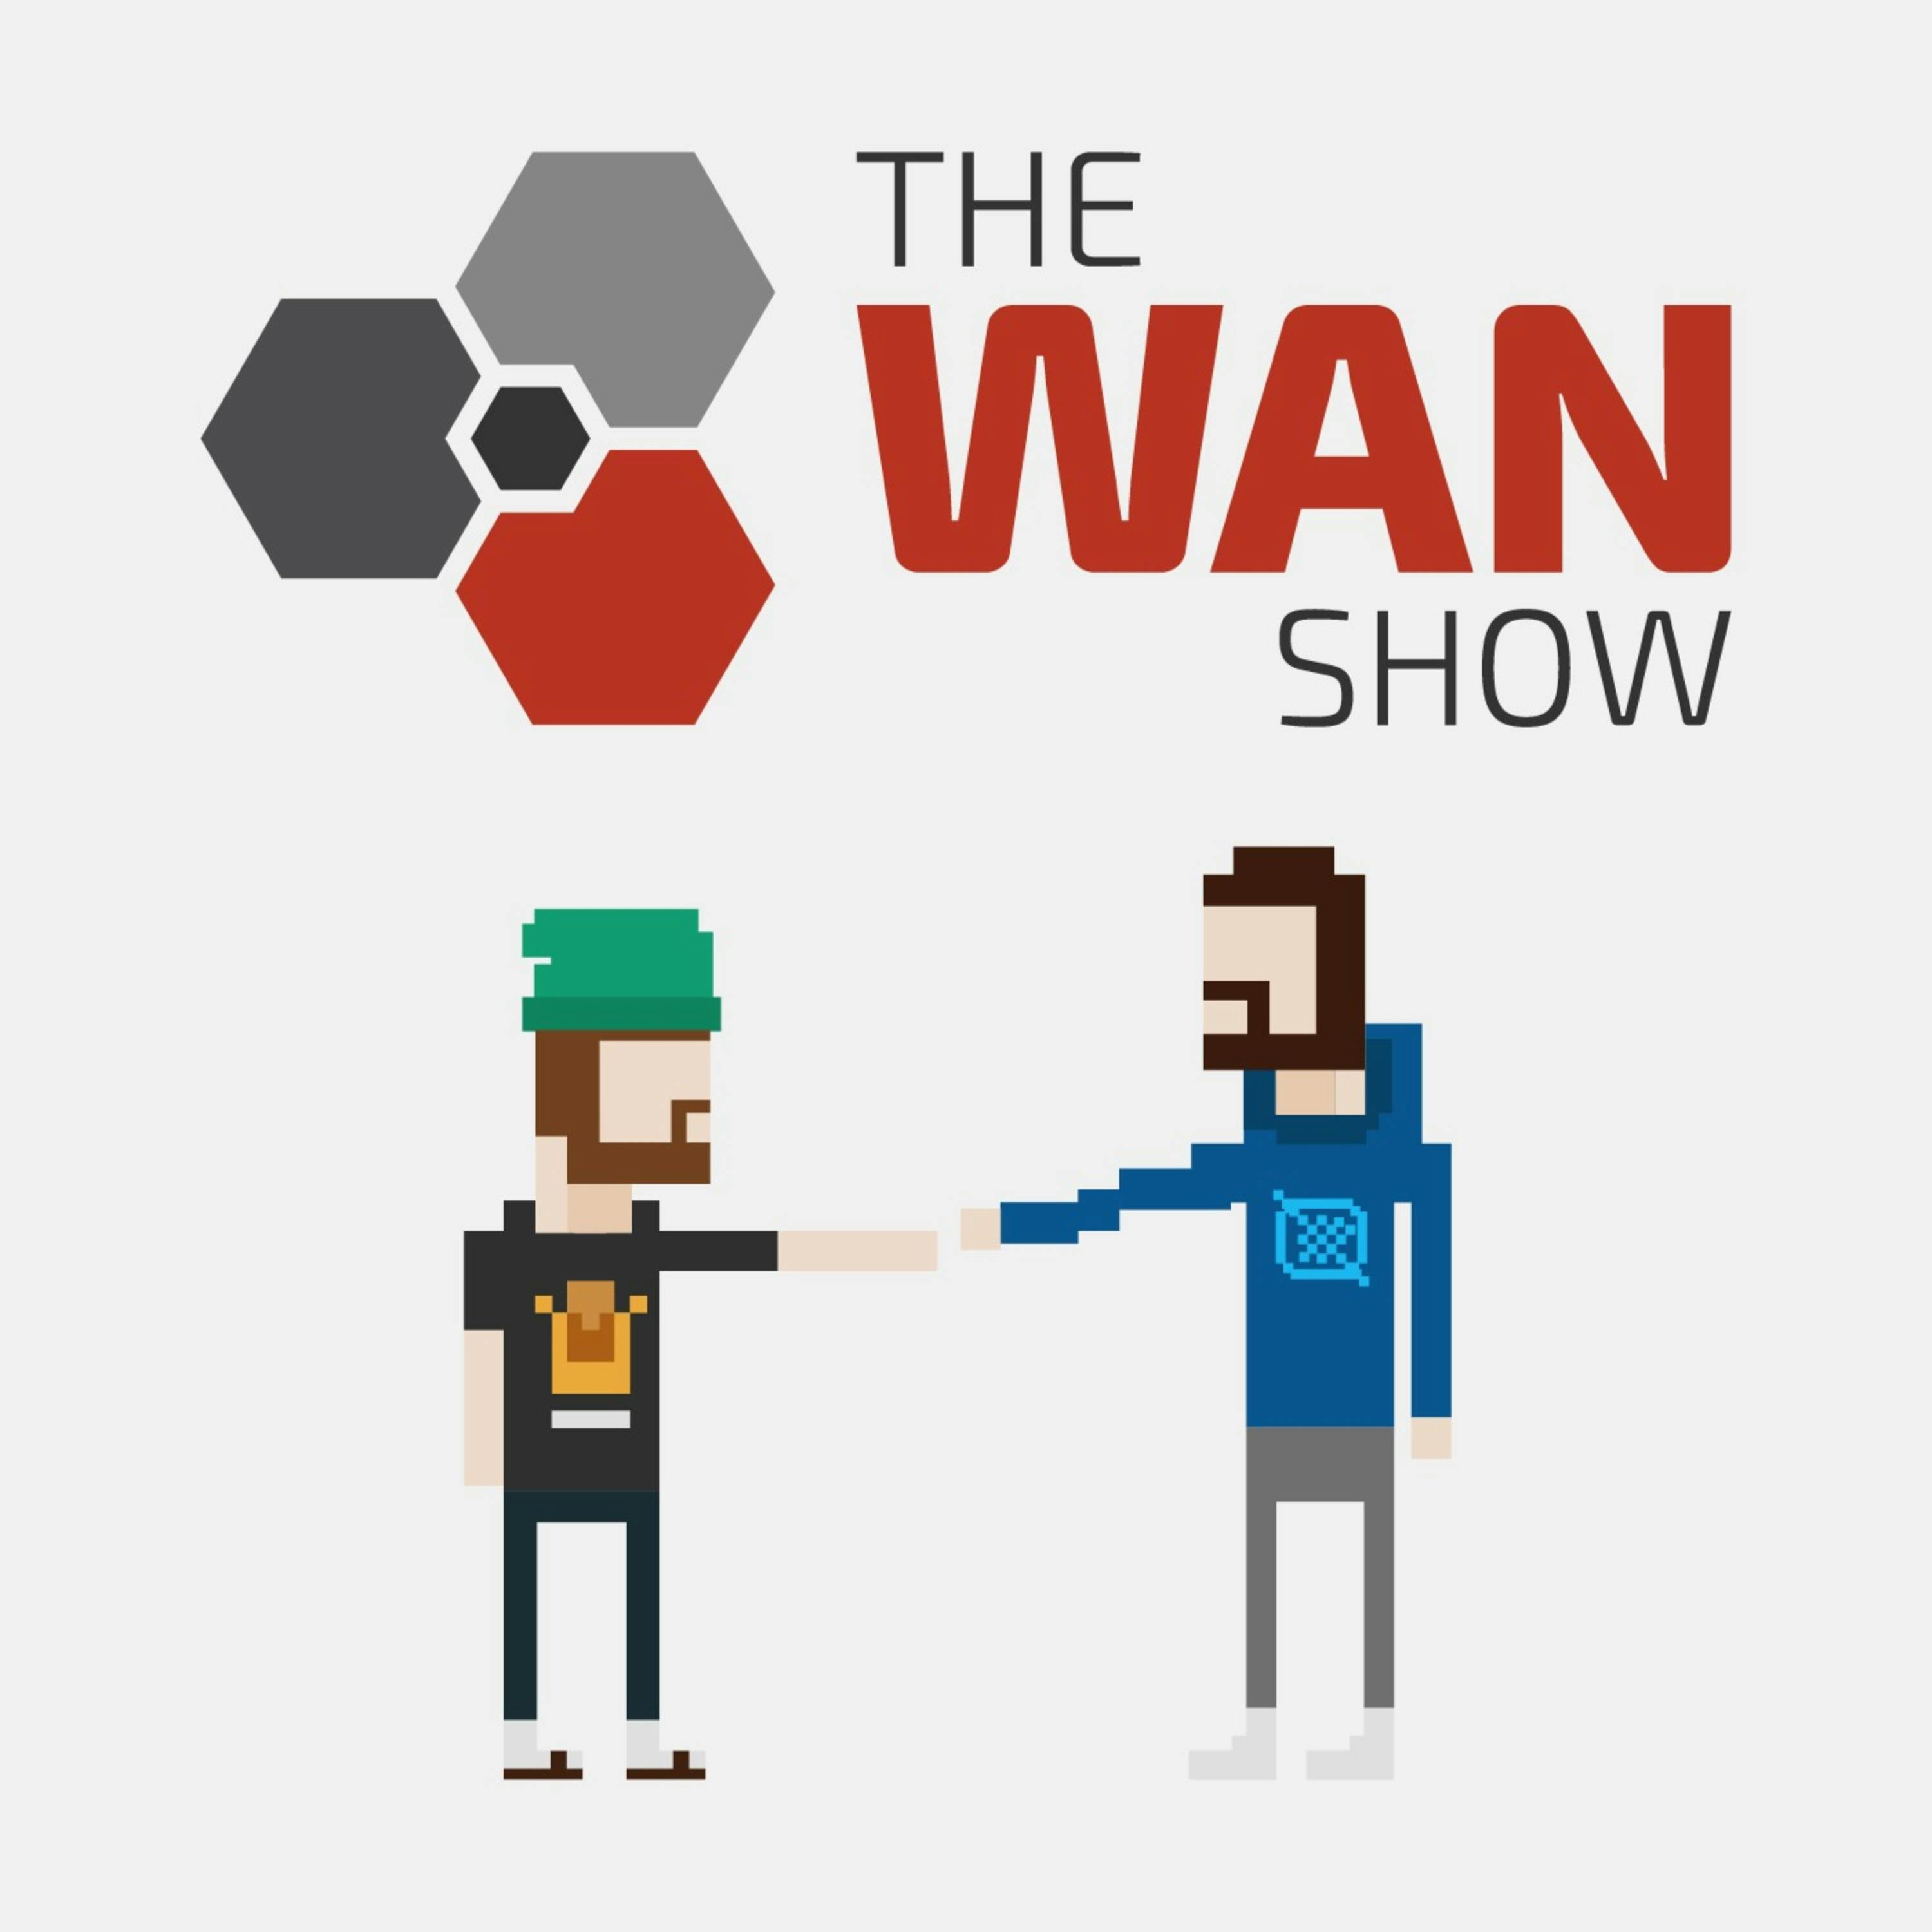 Intel is Staging a BIG Comeback! - WAN Show January 22, 2021